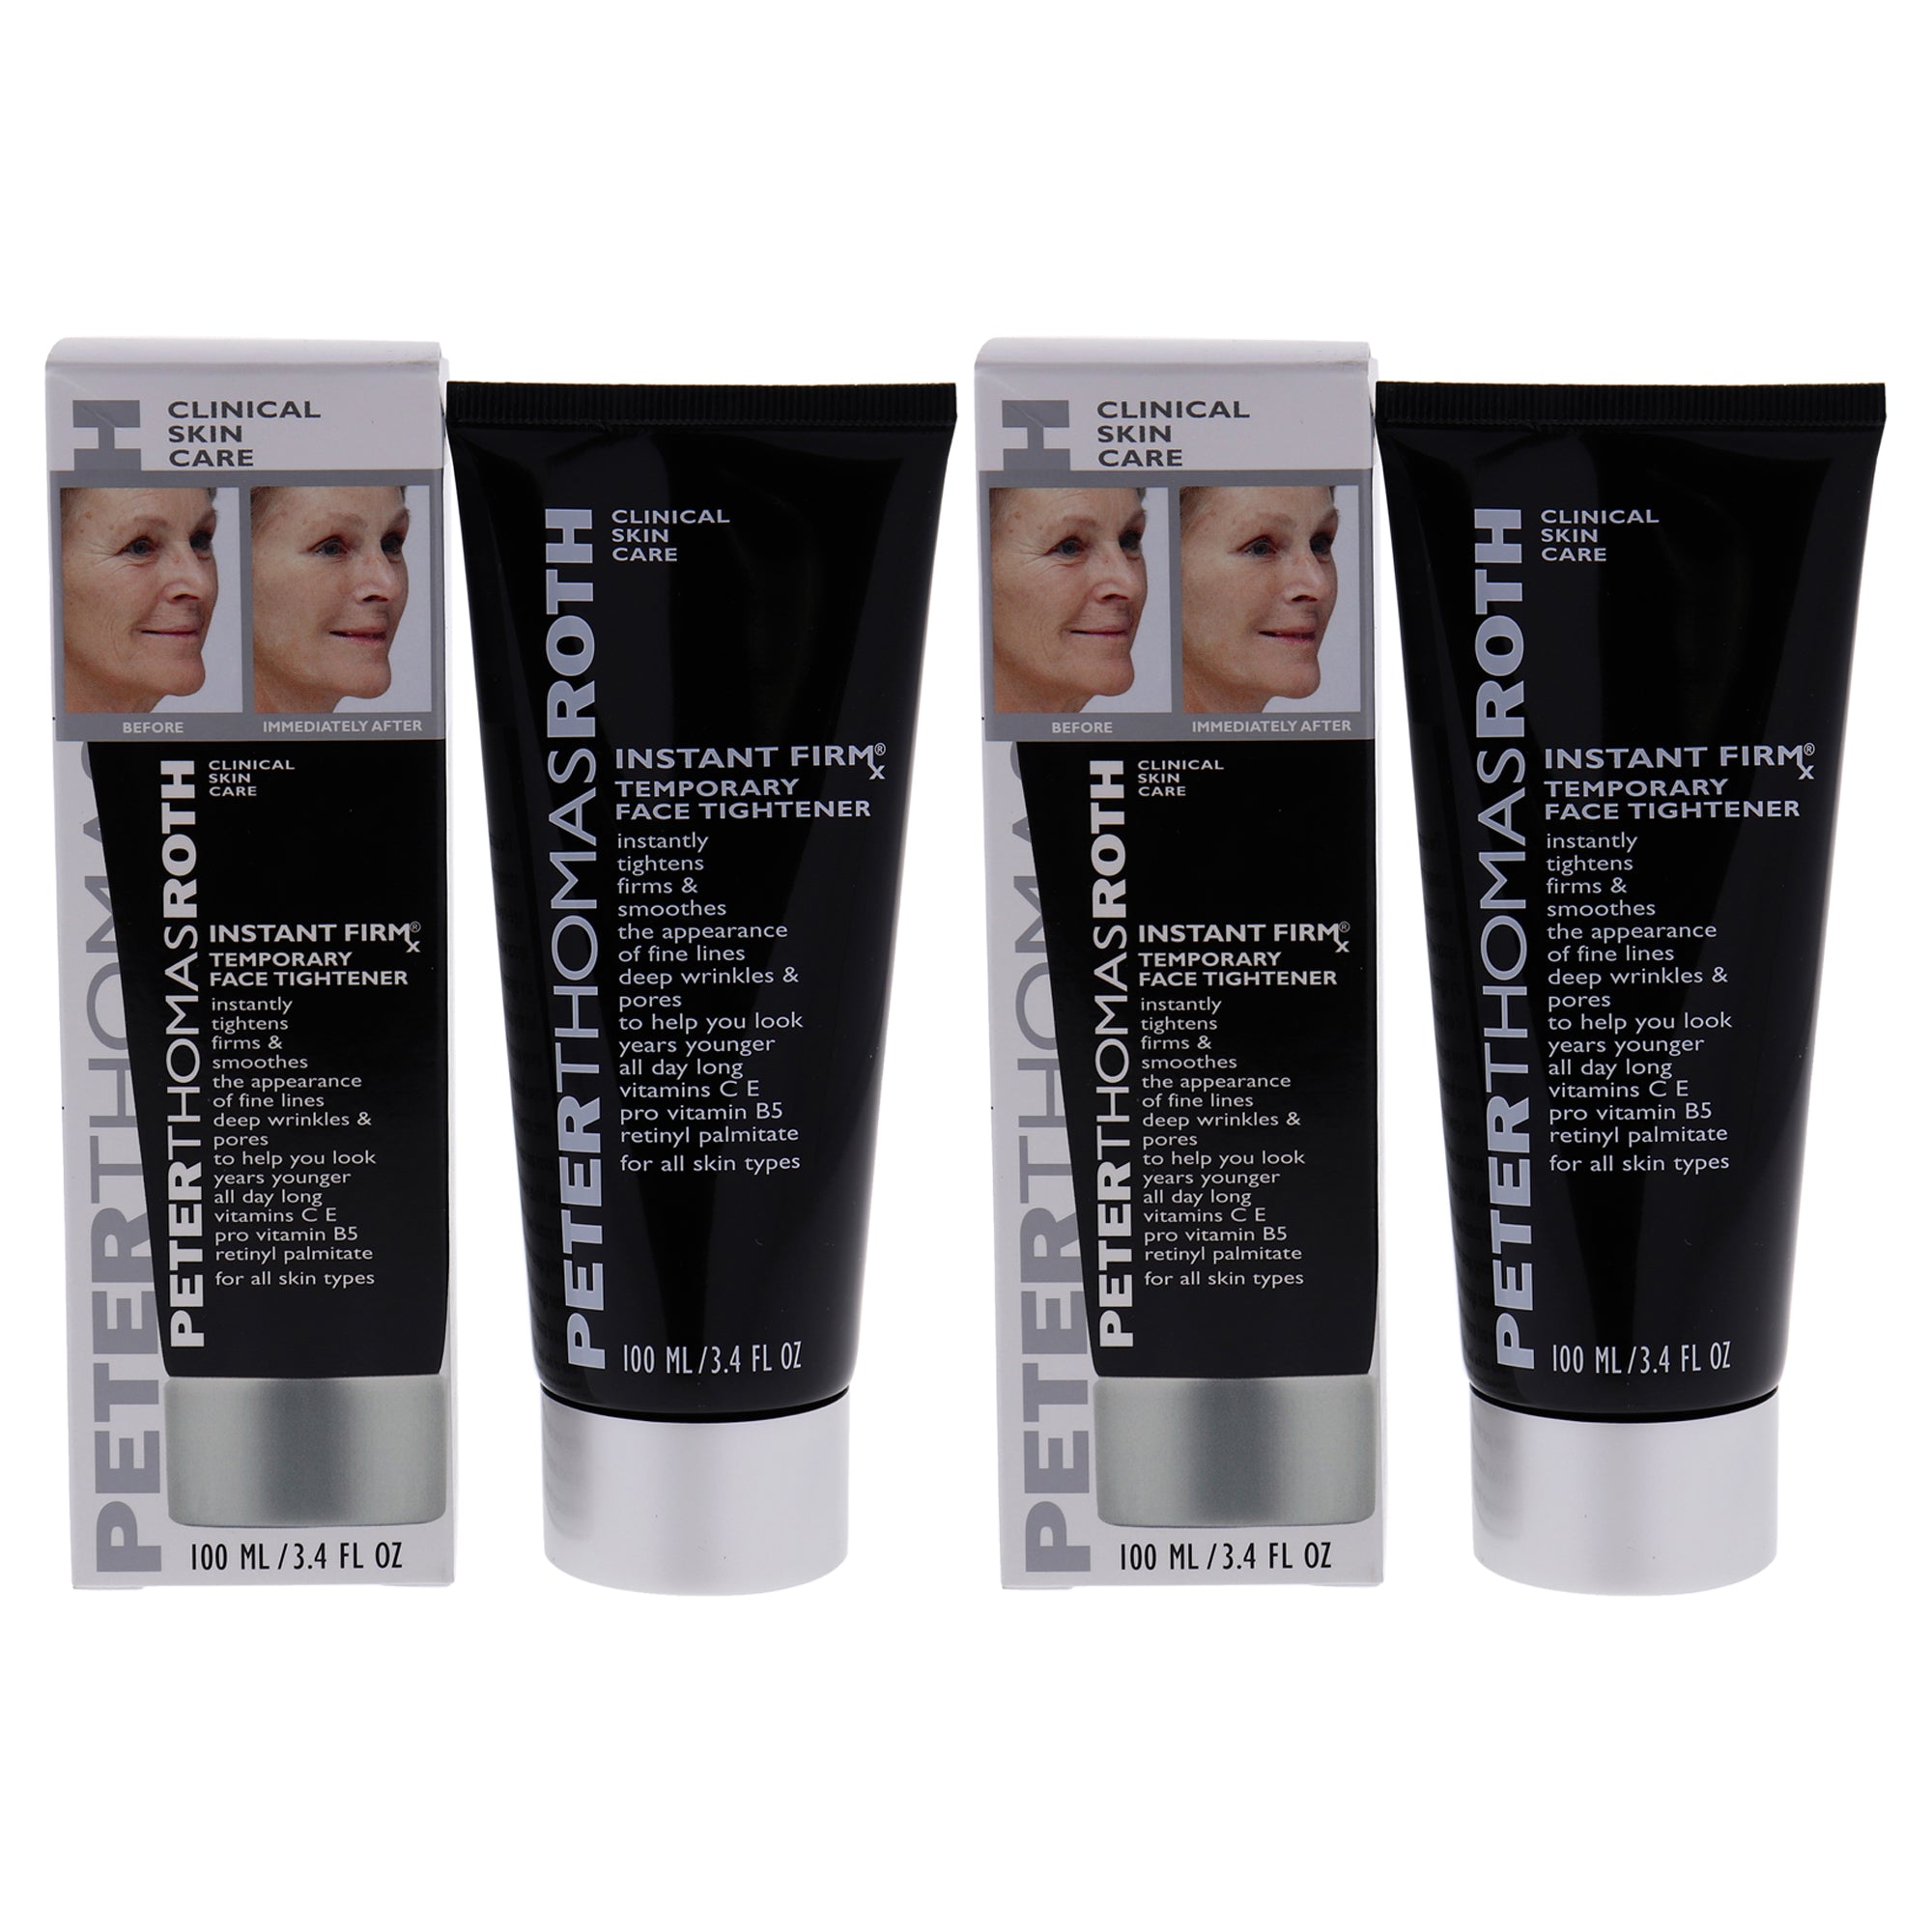 Instant Firmx Temporary Face Tightener by Peter Thomas Roth for Unisex - 3.4 oz Cream - Pack of 2